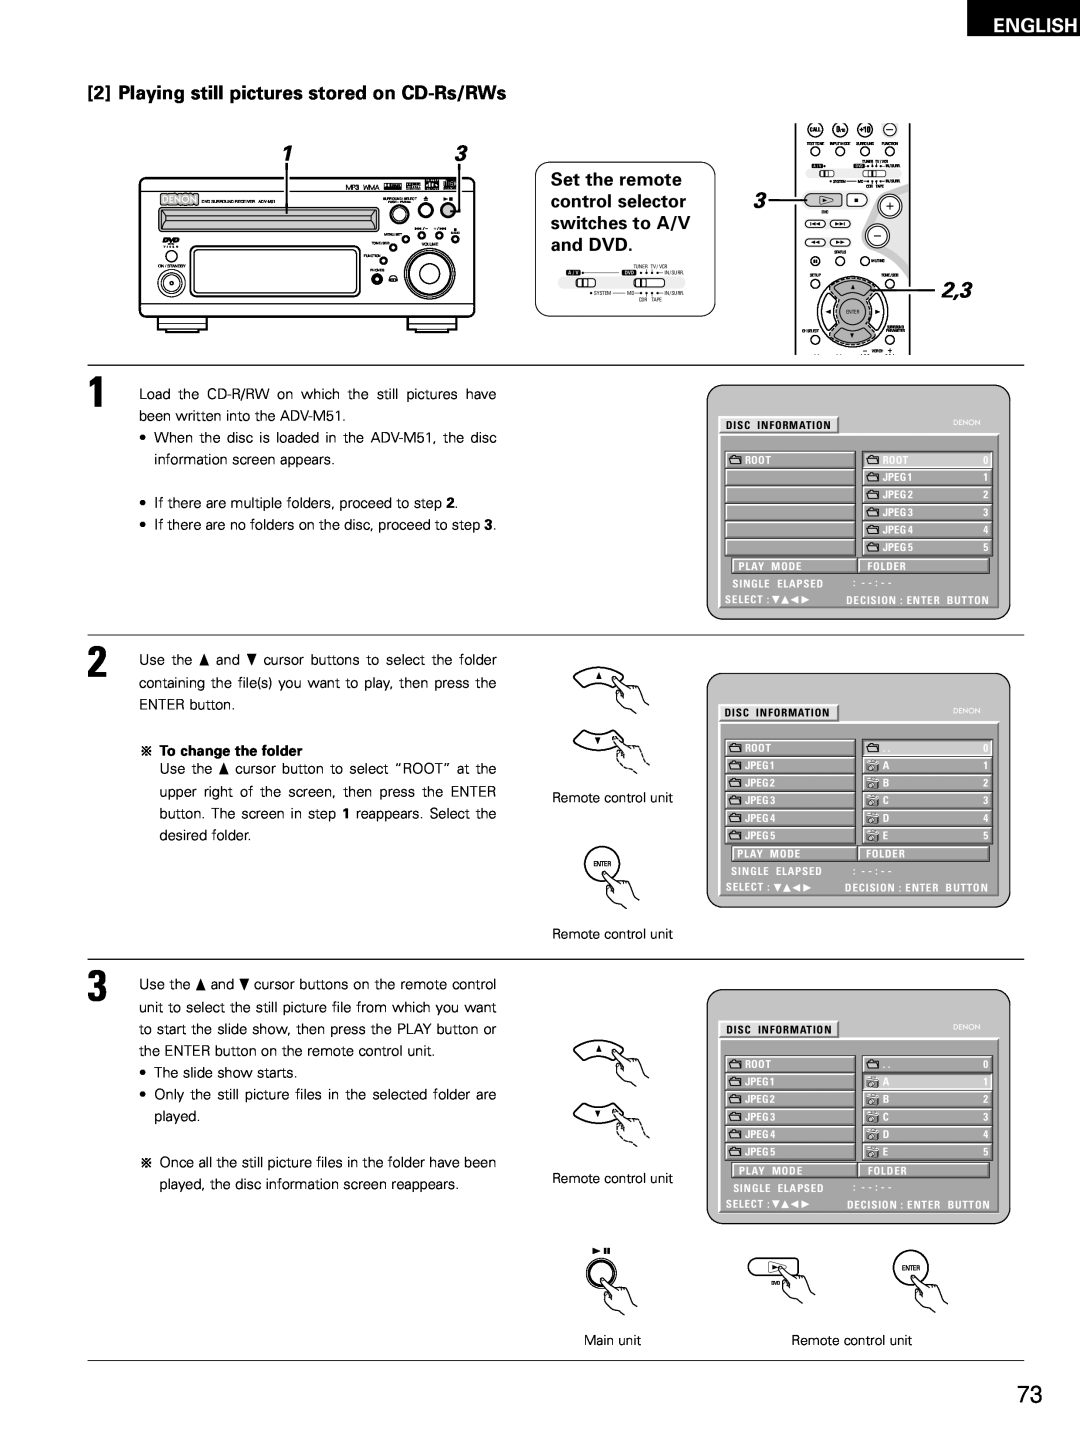 Denon ADV-M51, D-M51DVS, ADVM51 manual Playing still pictures stored on CD-Rs/RWs, English, To change the folder 